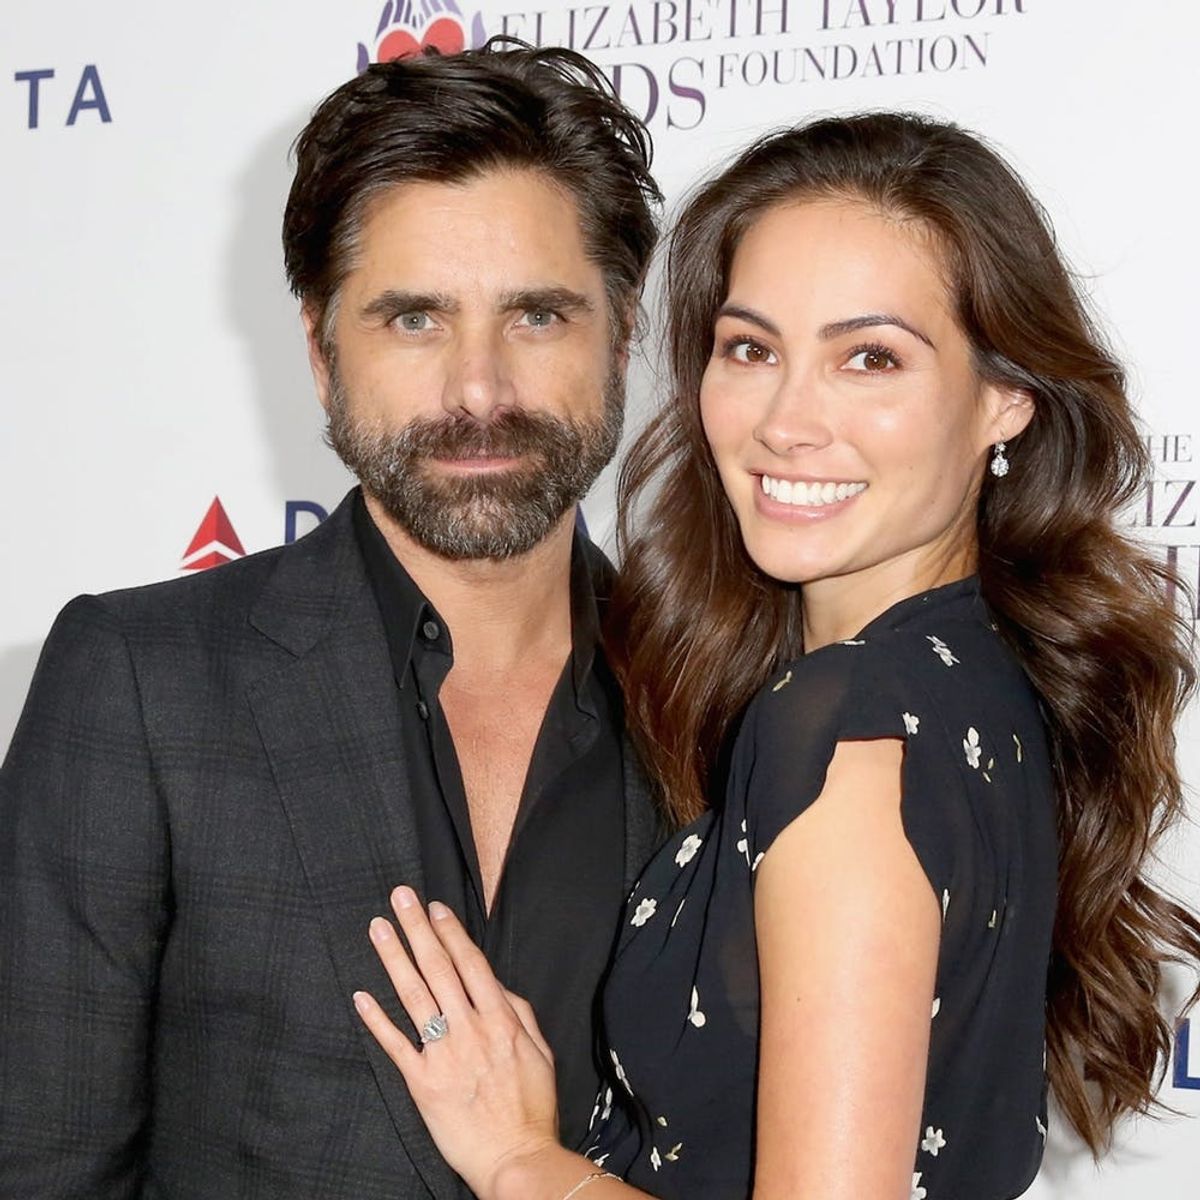 John Stamos and Caitlin McHugh Just Welcomed a Baby Boy!